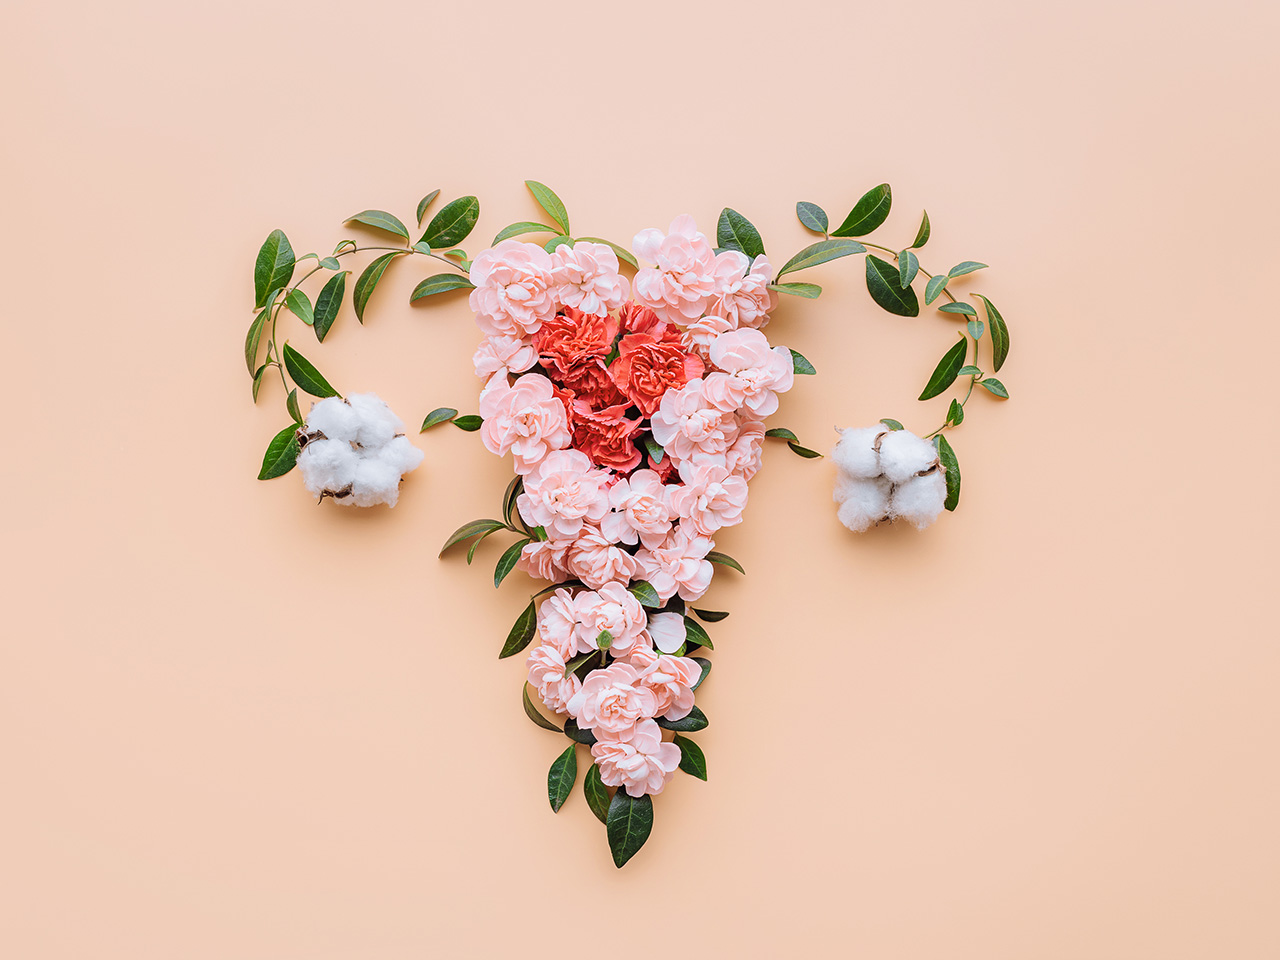 An assortment of flowers, arranged to look like the female reproductive system, on a peach background